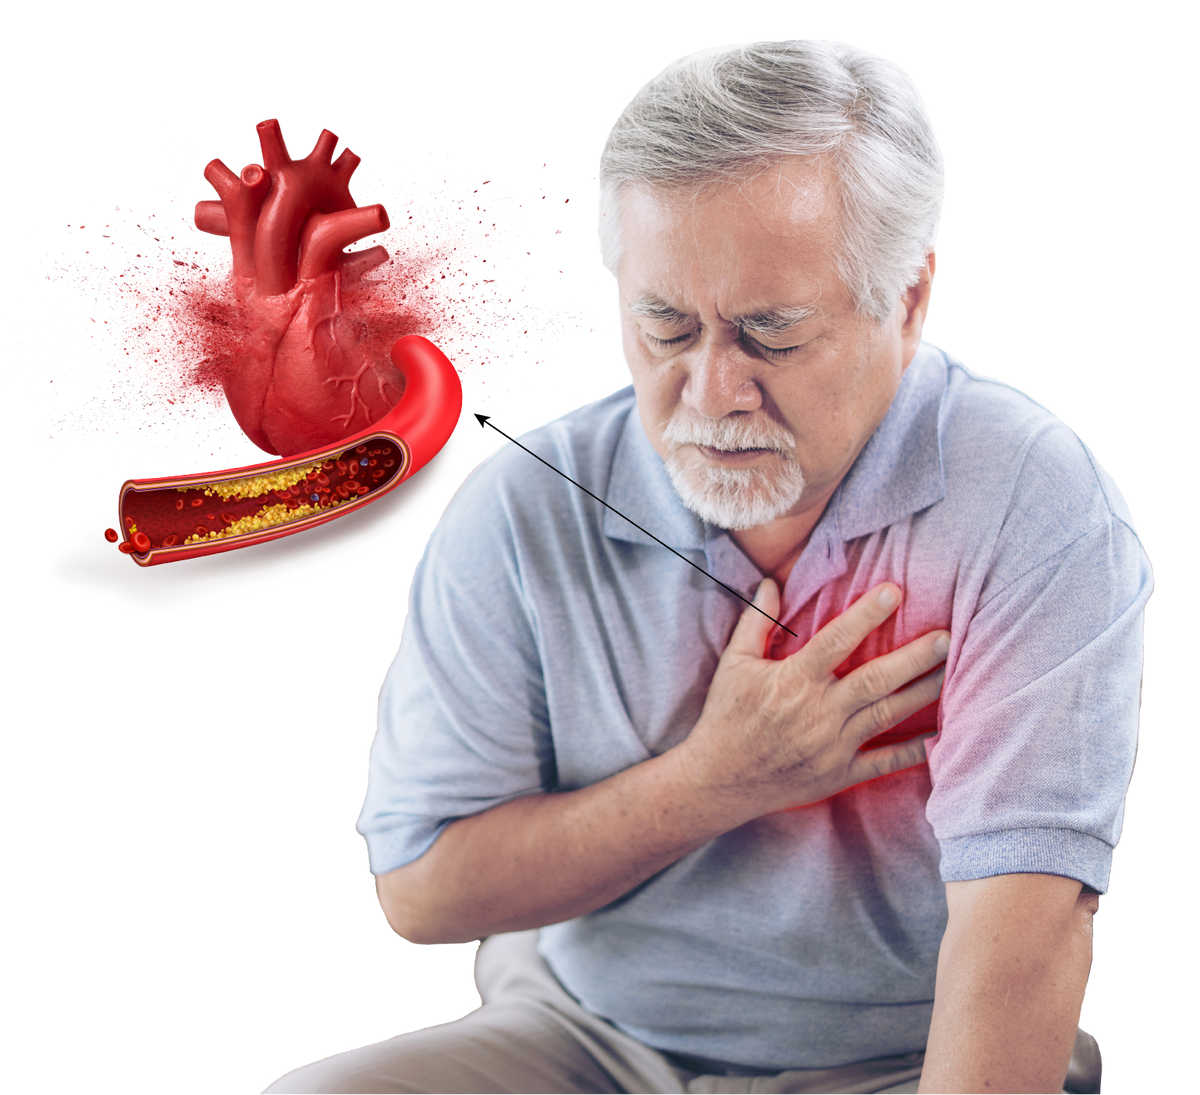 Treating older adults with clogged arteries